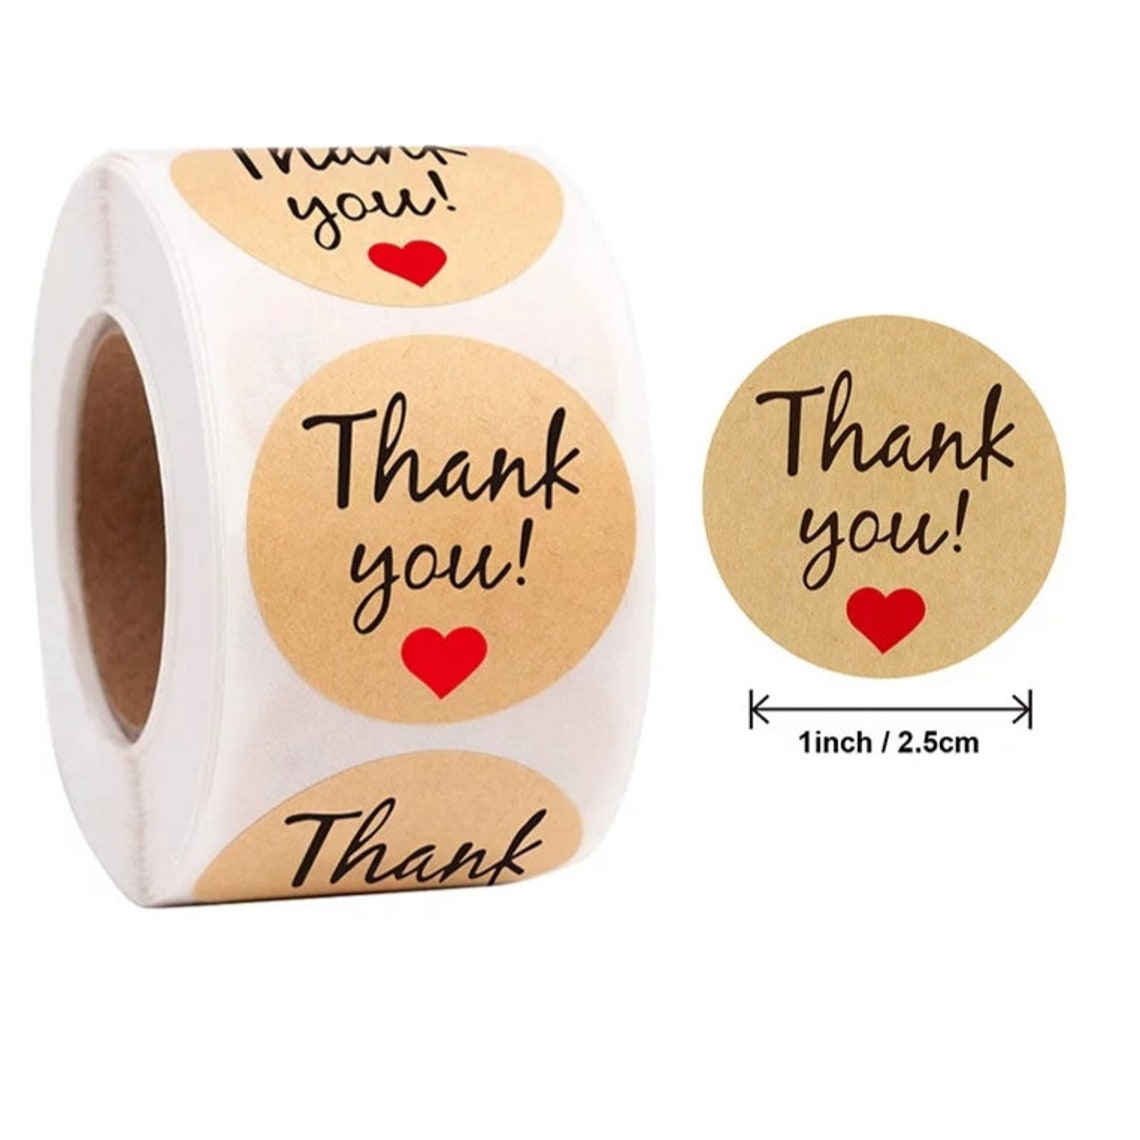 Thank You Stickers Roll 500pcs 1.5 | Etsy